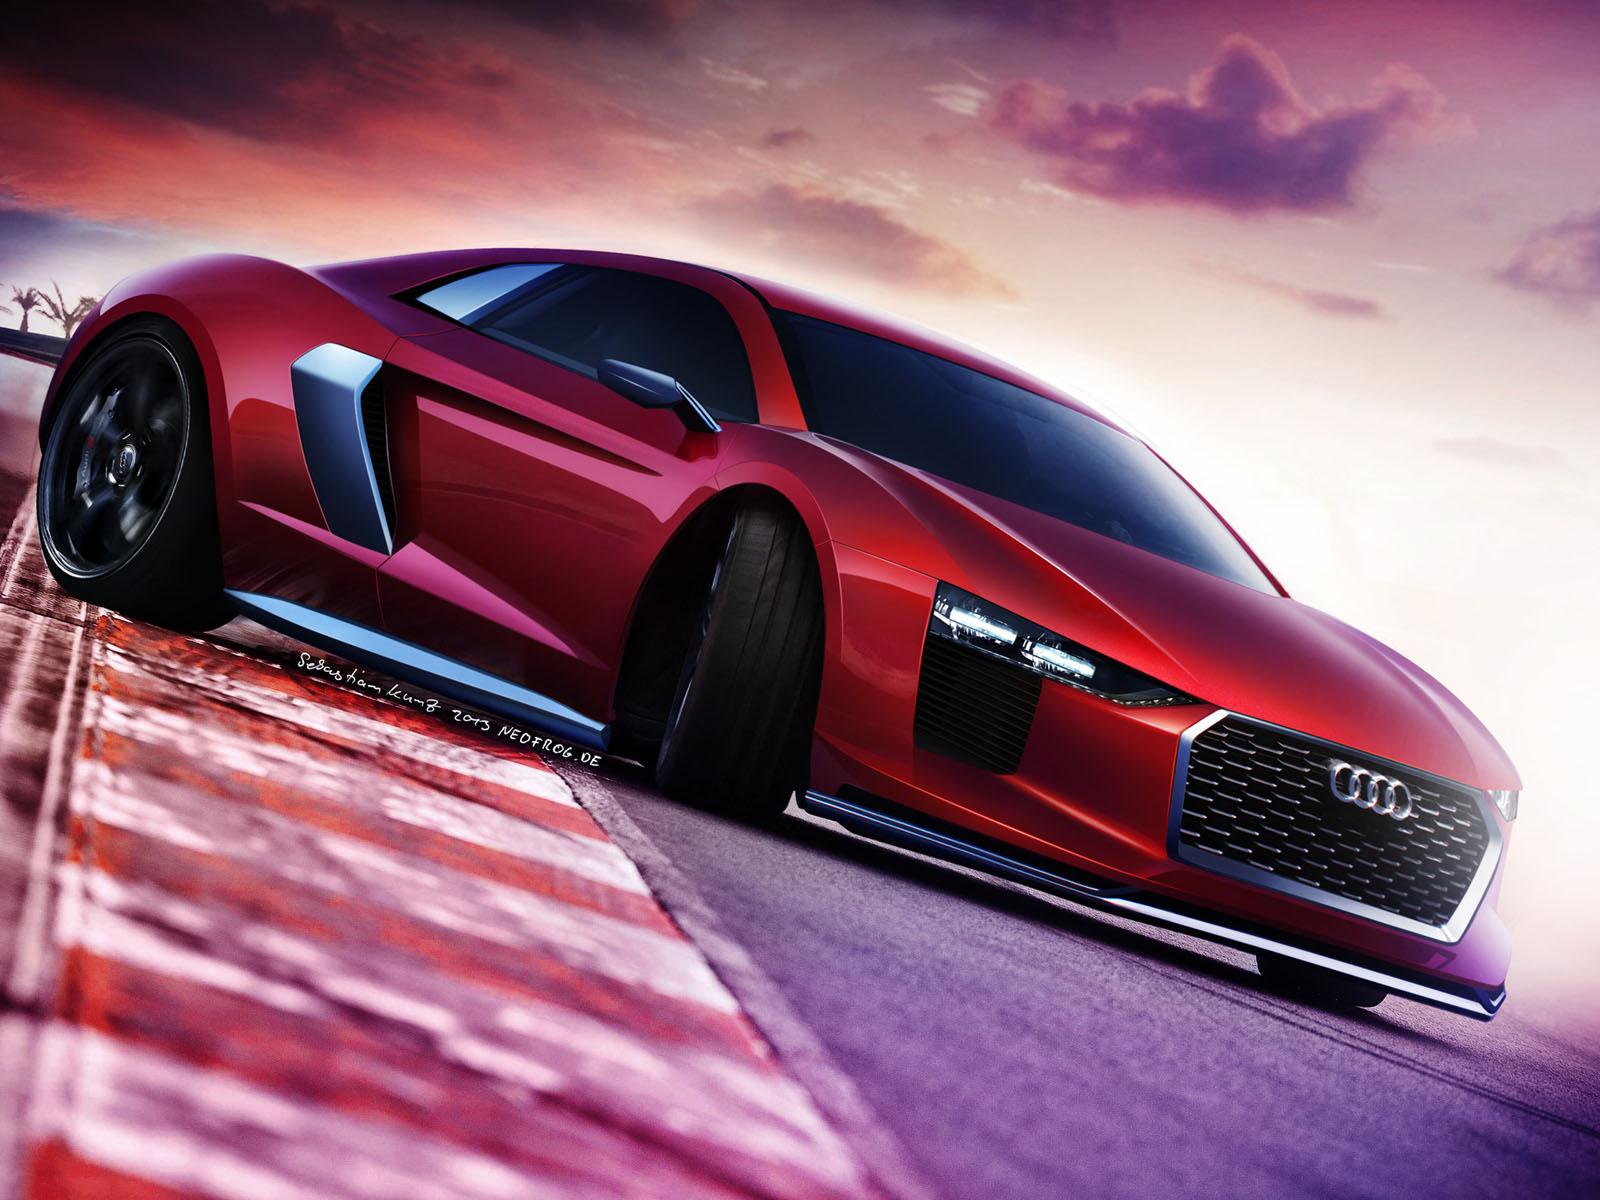 2015 Audi R8 Wallpaper   2015 Audi R8 Specification and Overview